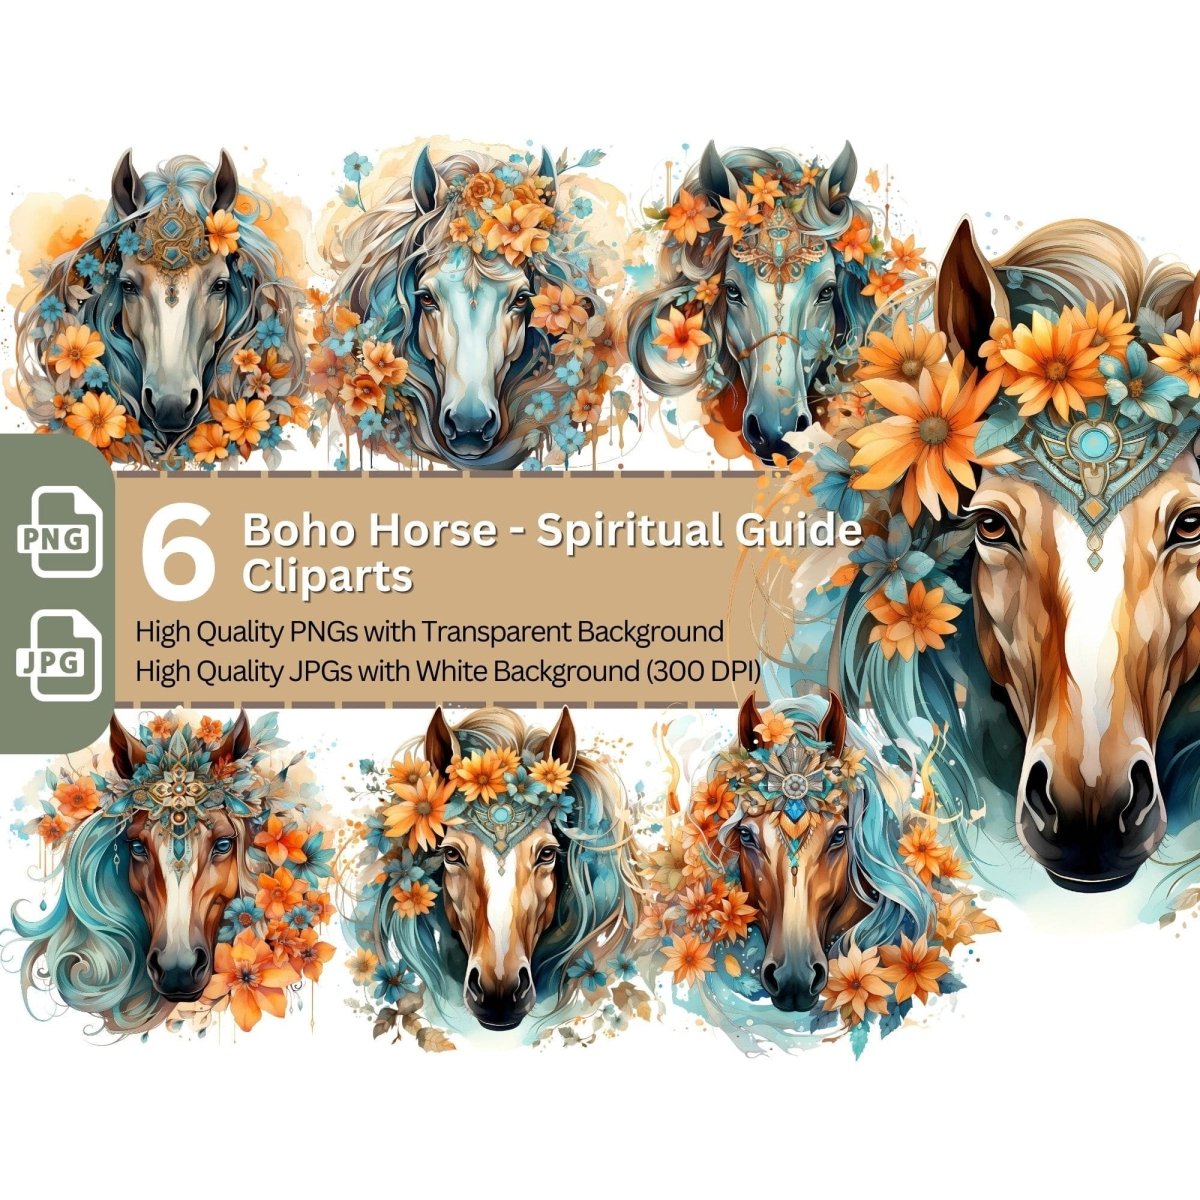 Boho Horse with Flowers Spiritual Guide Cliparts 6+6 High Quality PNG Animal - Everything Pixel